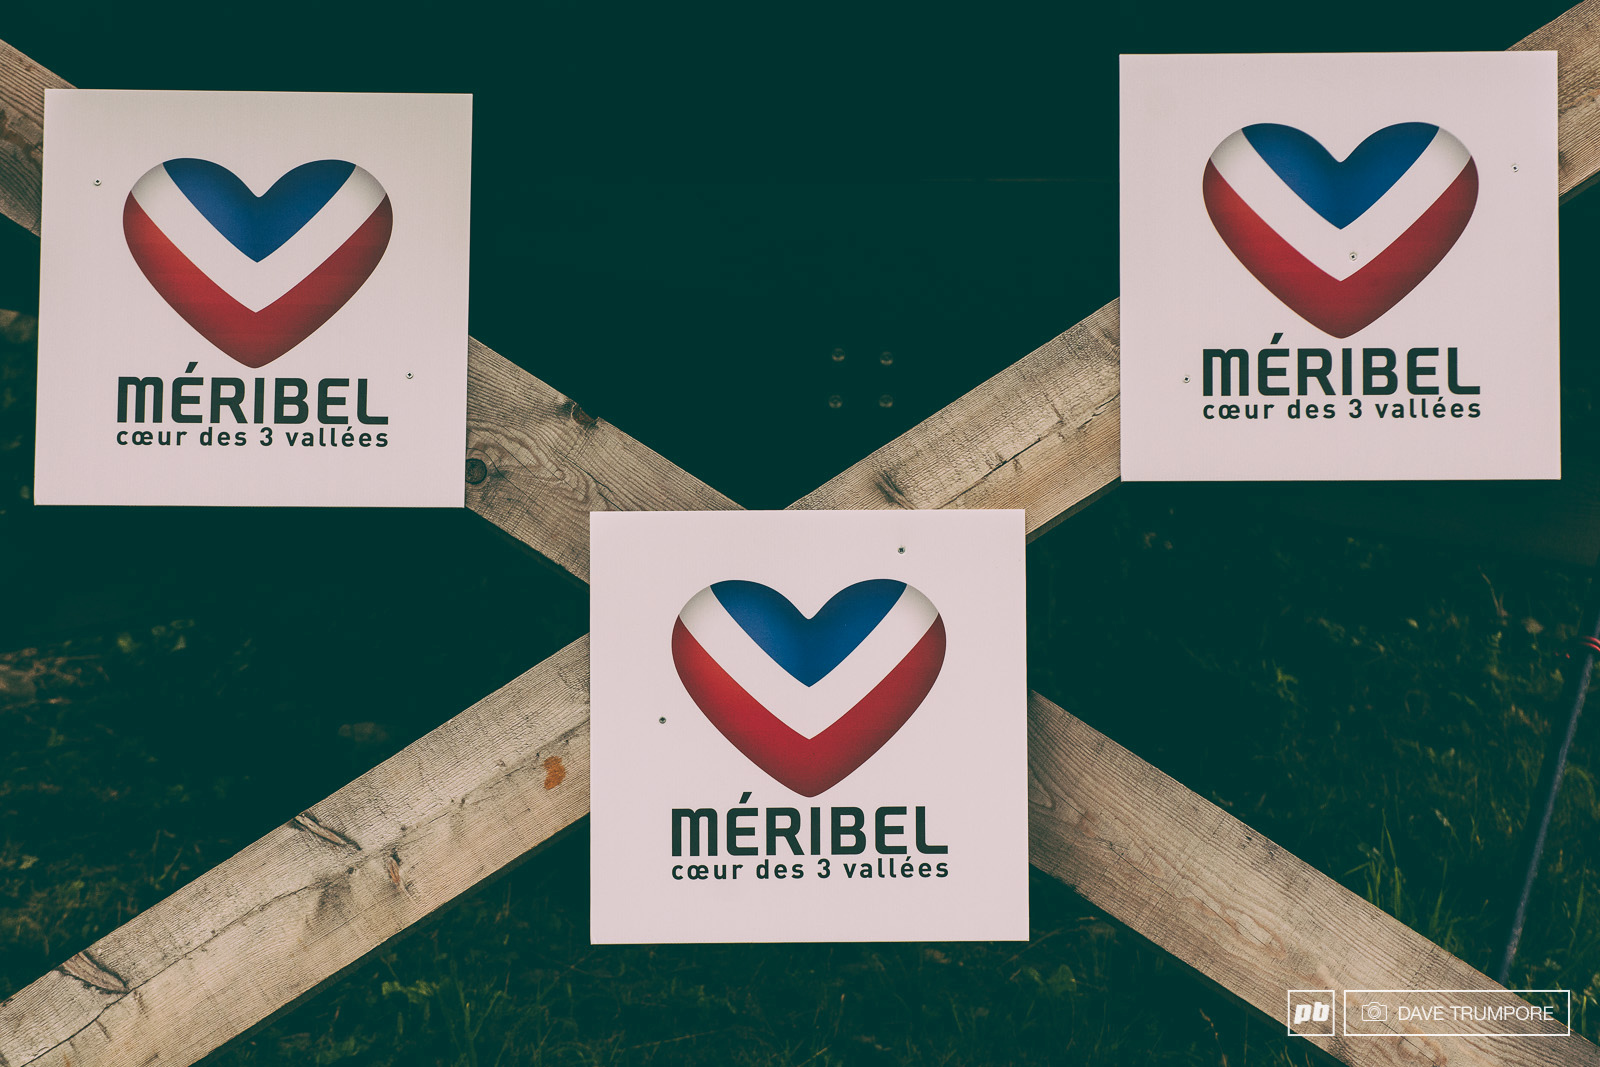 With a track this good it's not hard to love Meribel.